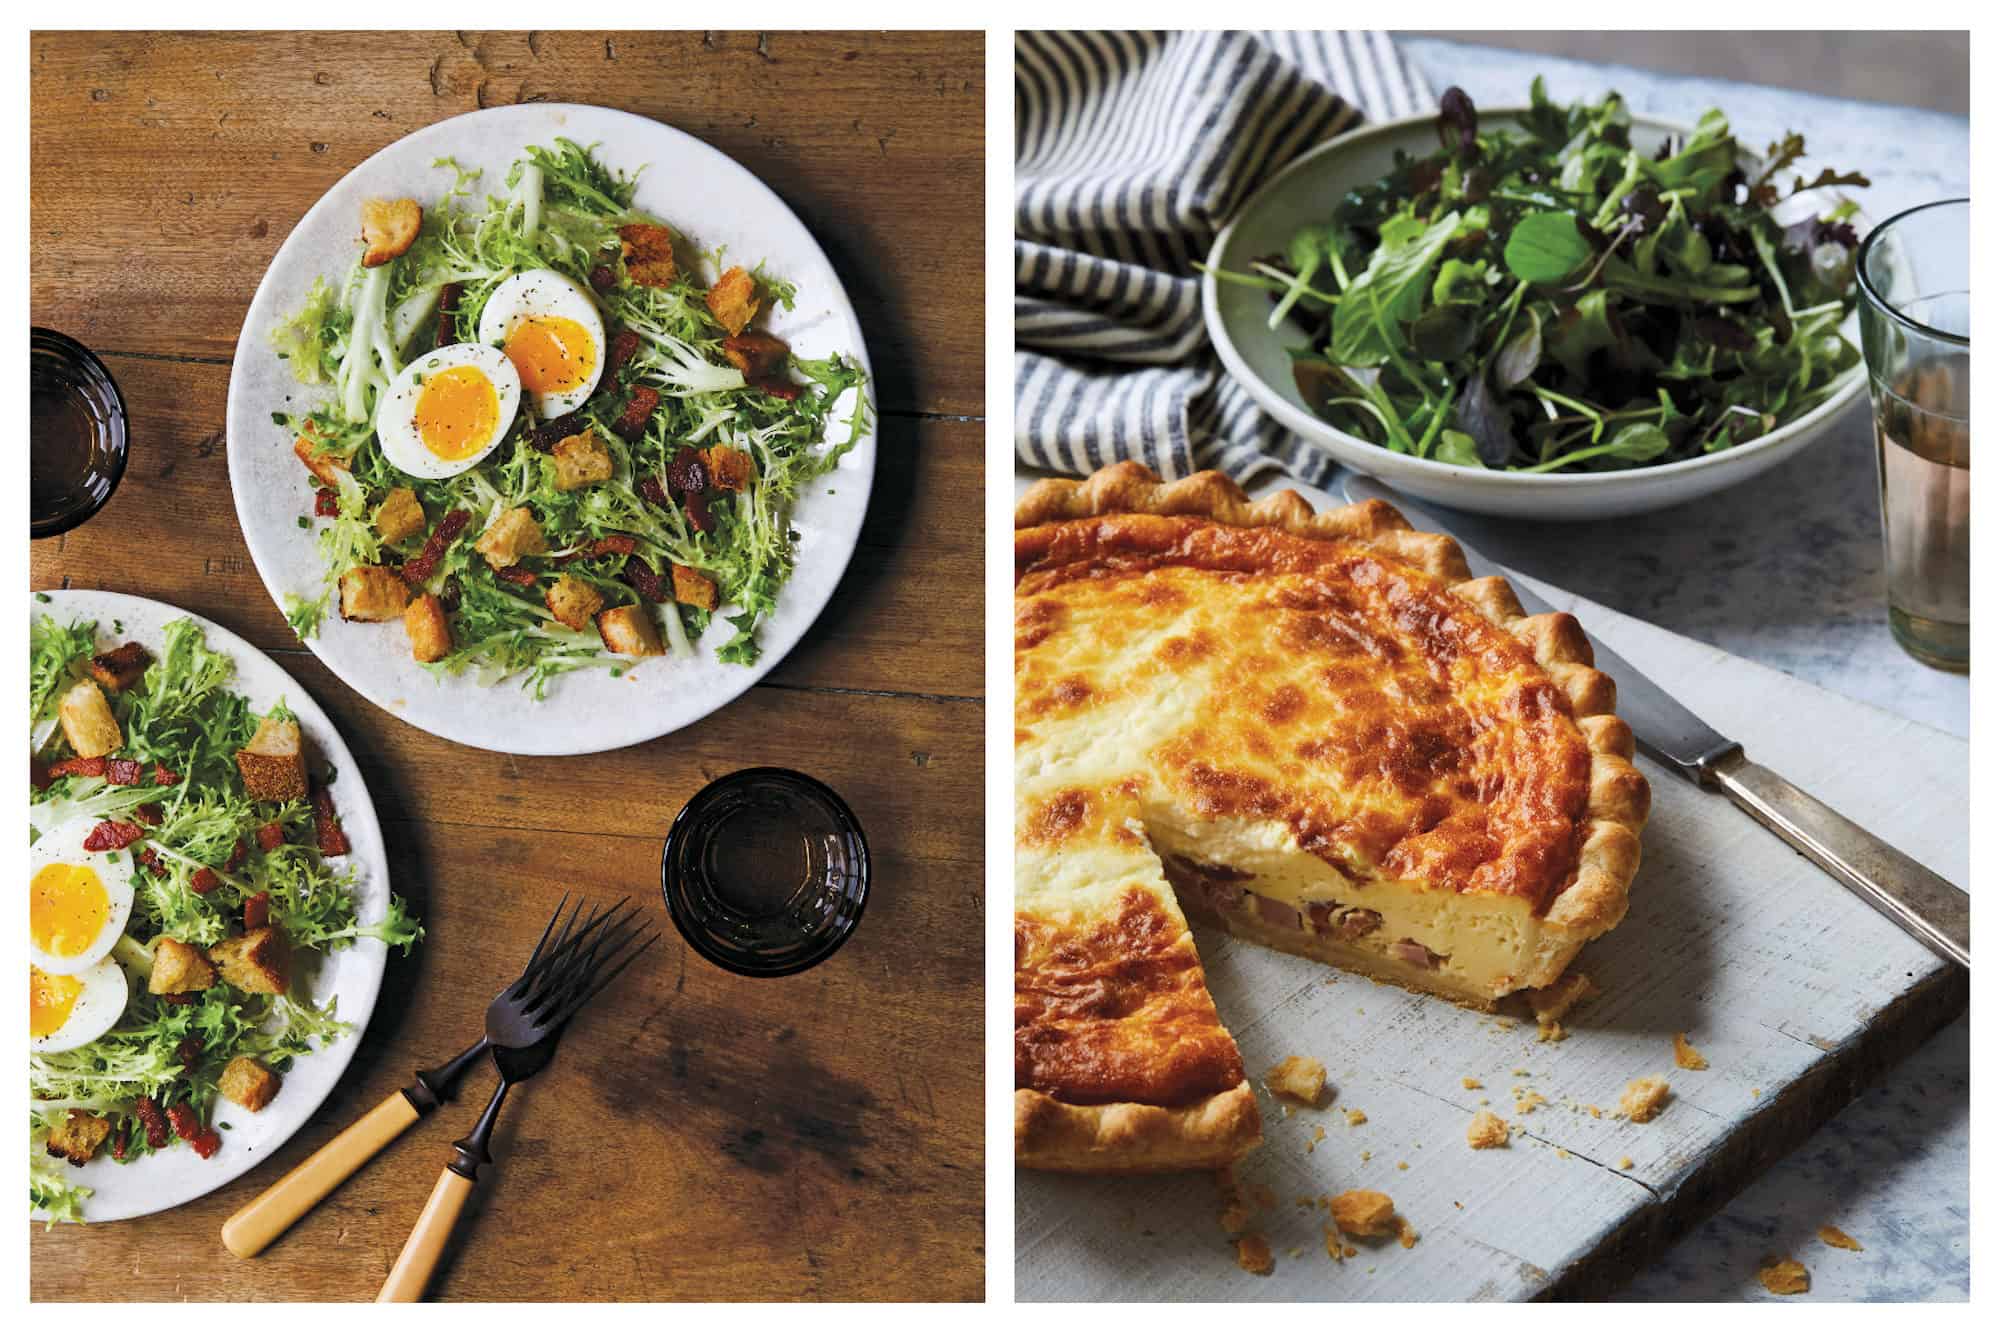 One of our favorite French cookbooks includes 'Tasting Paris' by Clotilde Dusoulier and we love her Frisée Salad with eggs (left) and quiche Lorraine (right). 